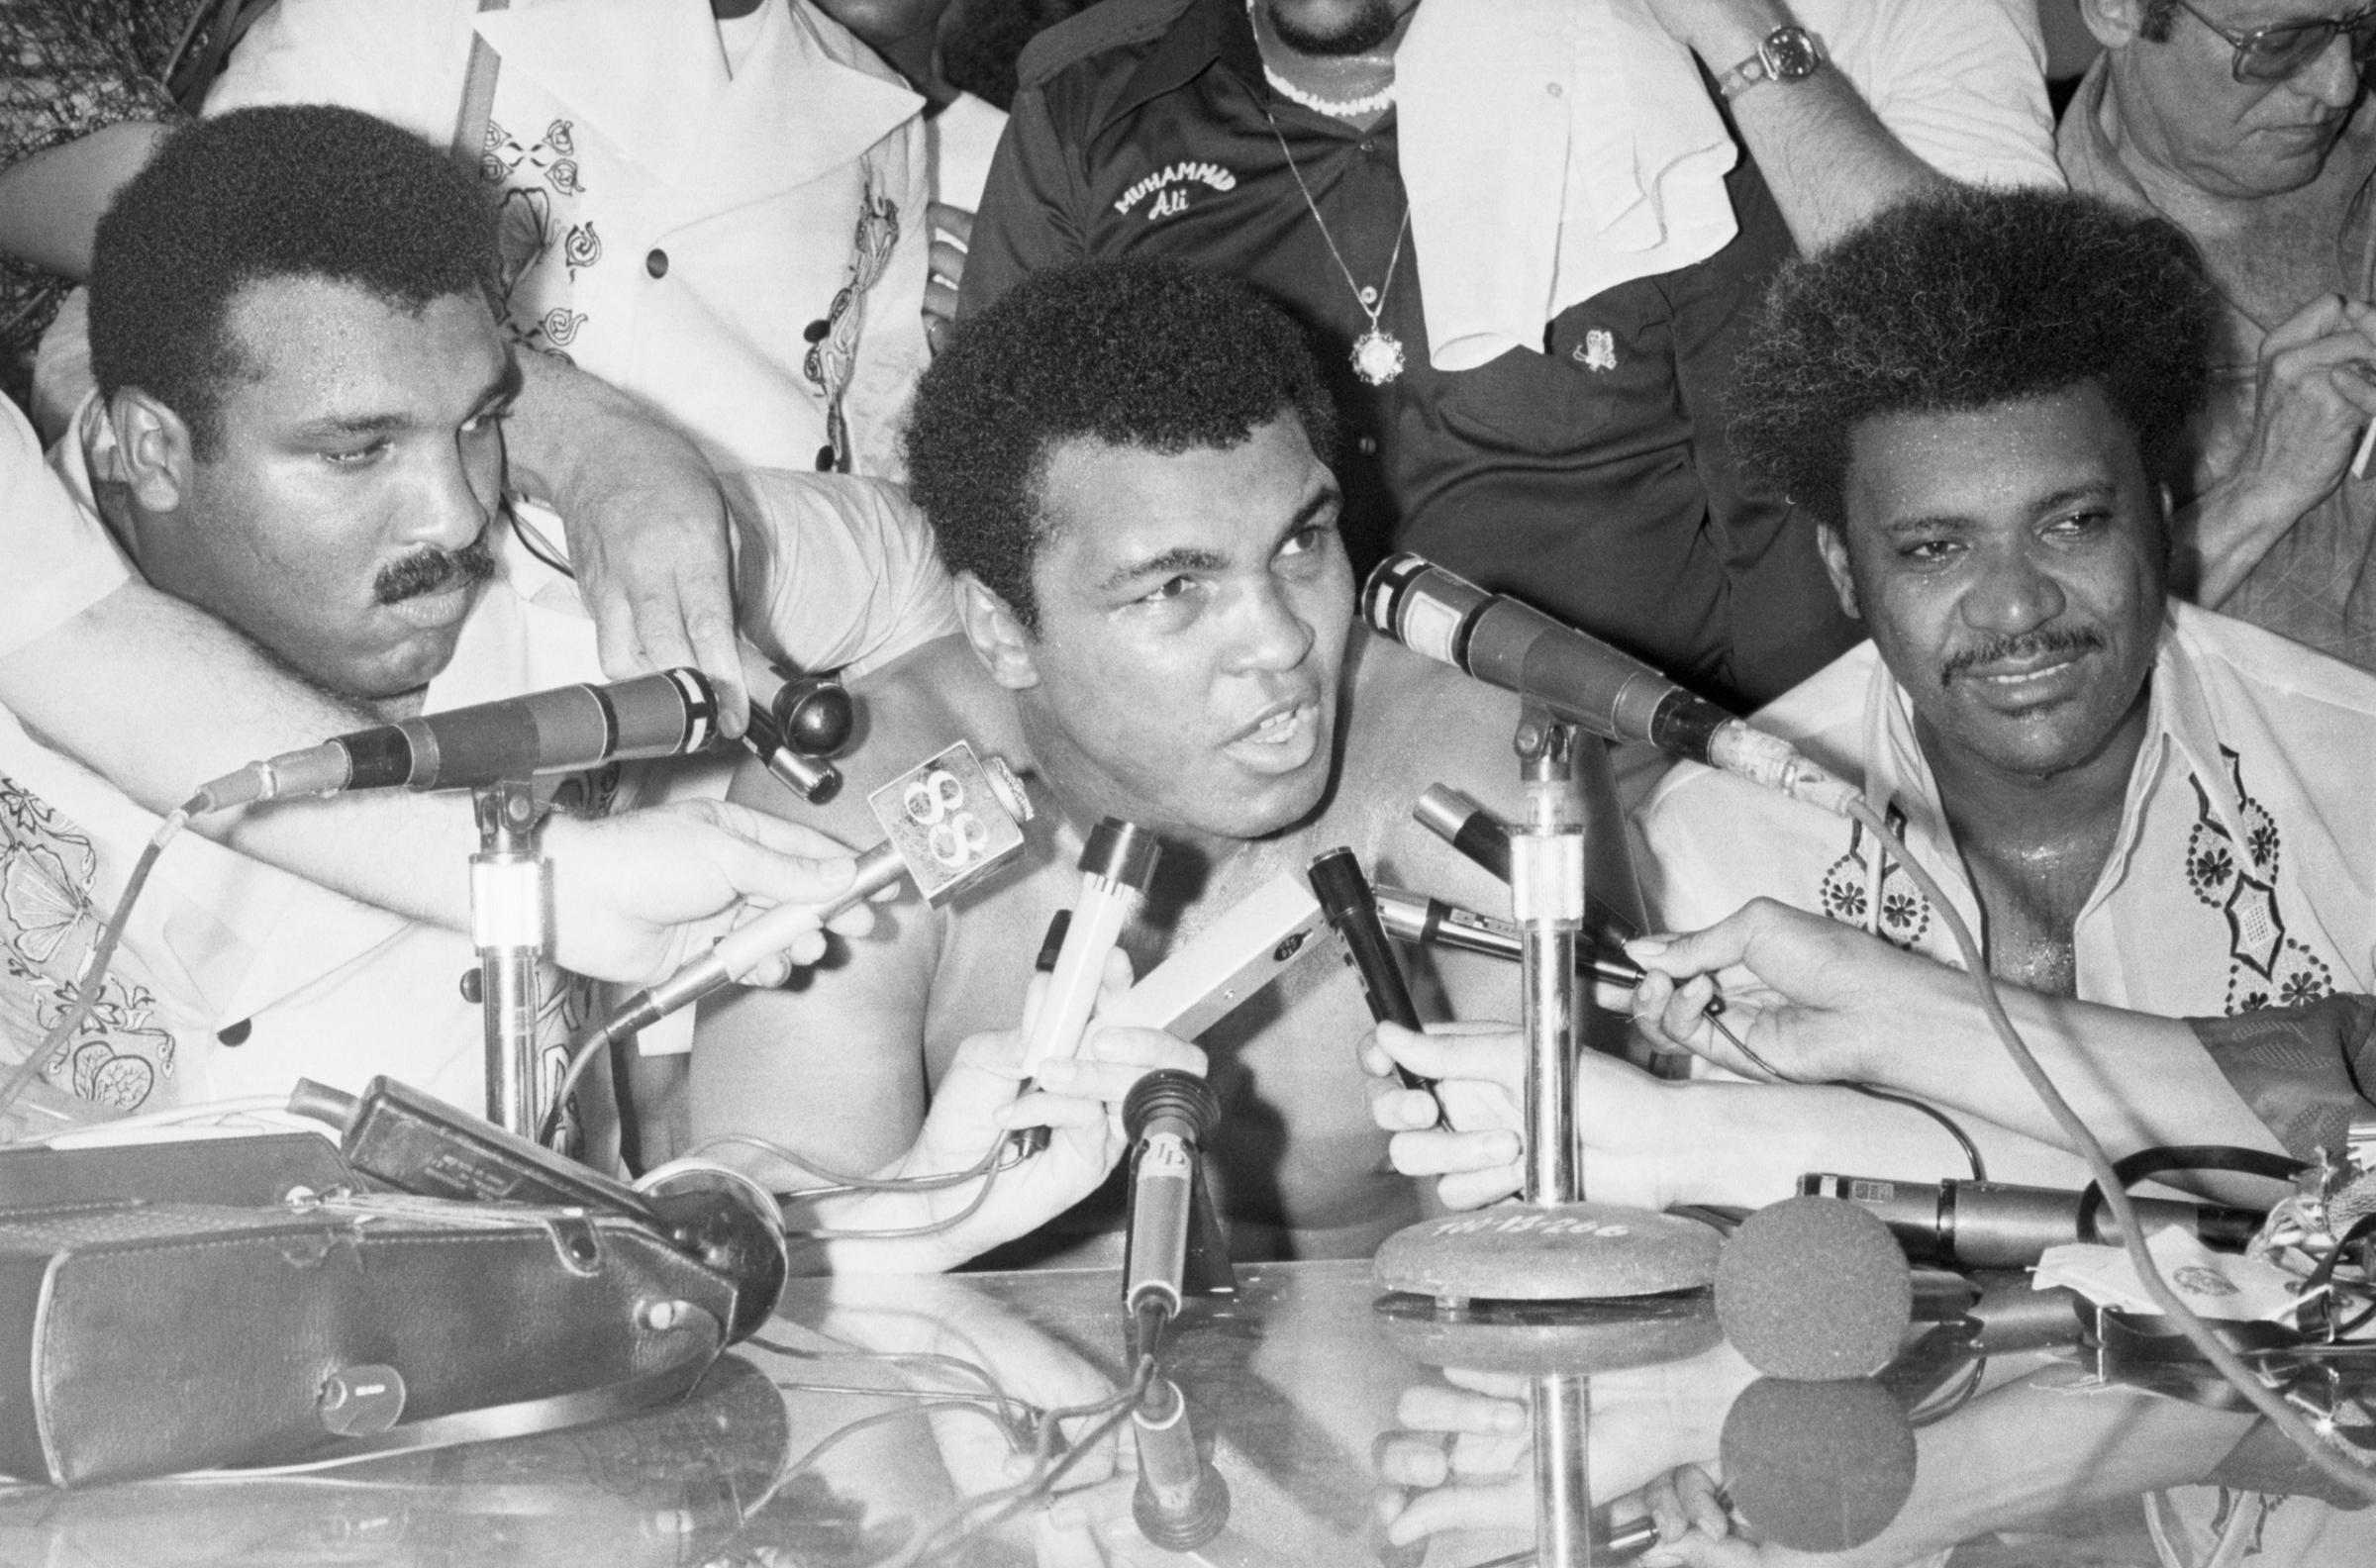 Heavyweight champion of the world Muhammad Ali (C) meets with the press after defeating challenger Smokin' Joe Frazier in the 14th round by TKO. Next to Ali is boxing promoter Don King (R), and Ali's brother Rahaman. Manila, Luzon Island, Philippines, October 1, 1975.